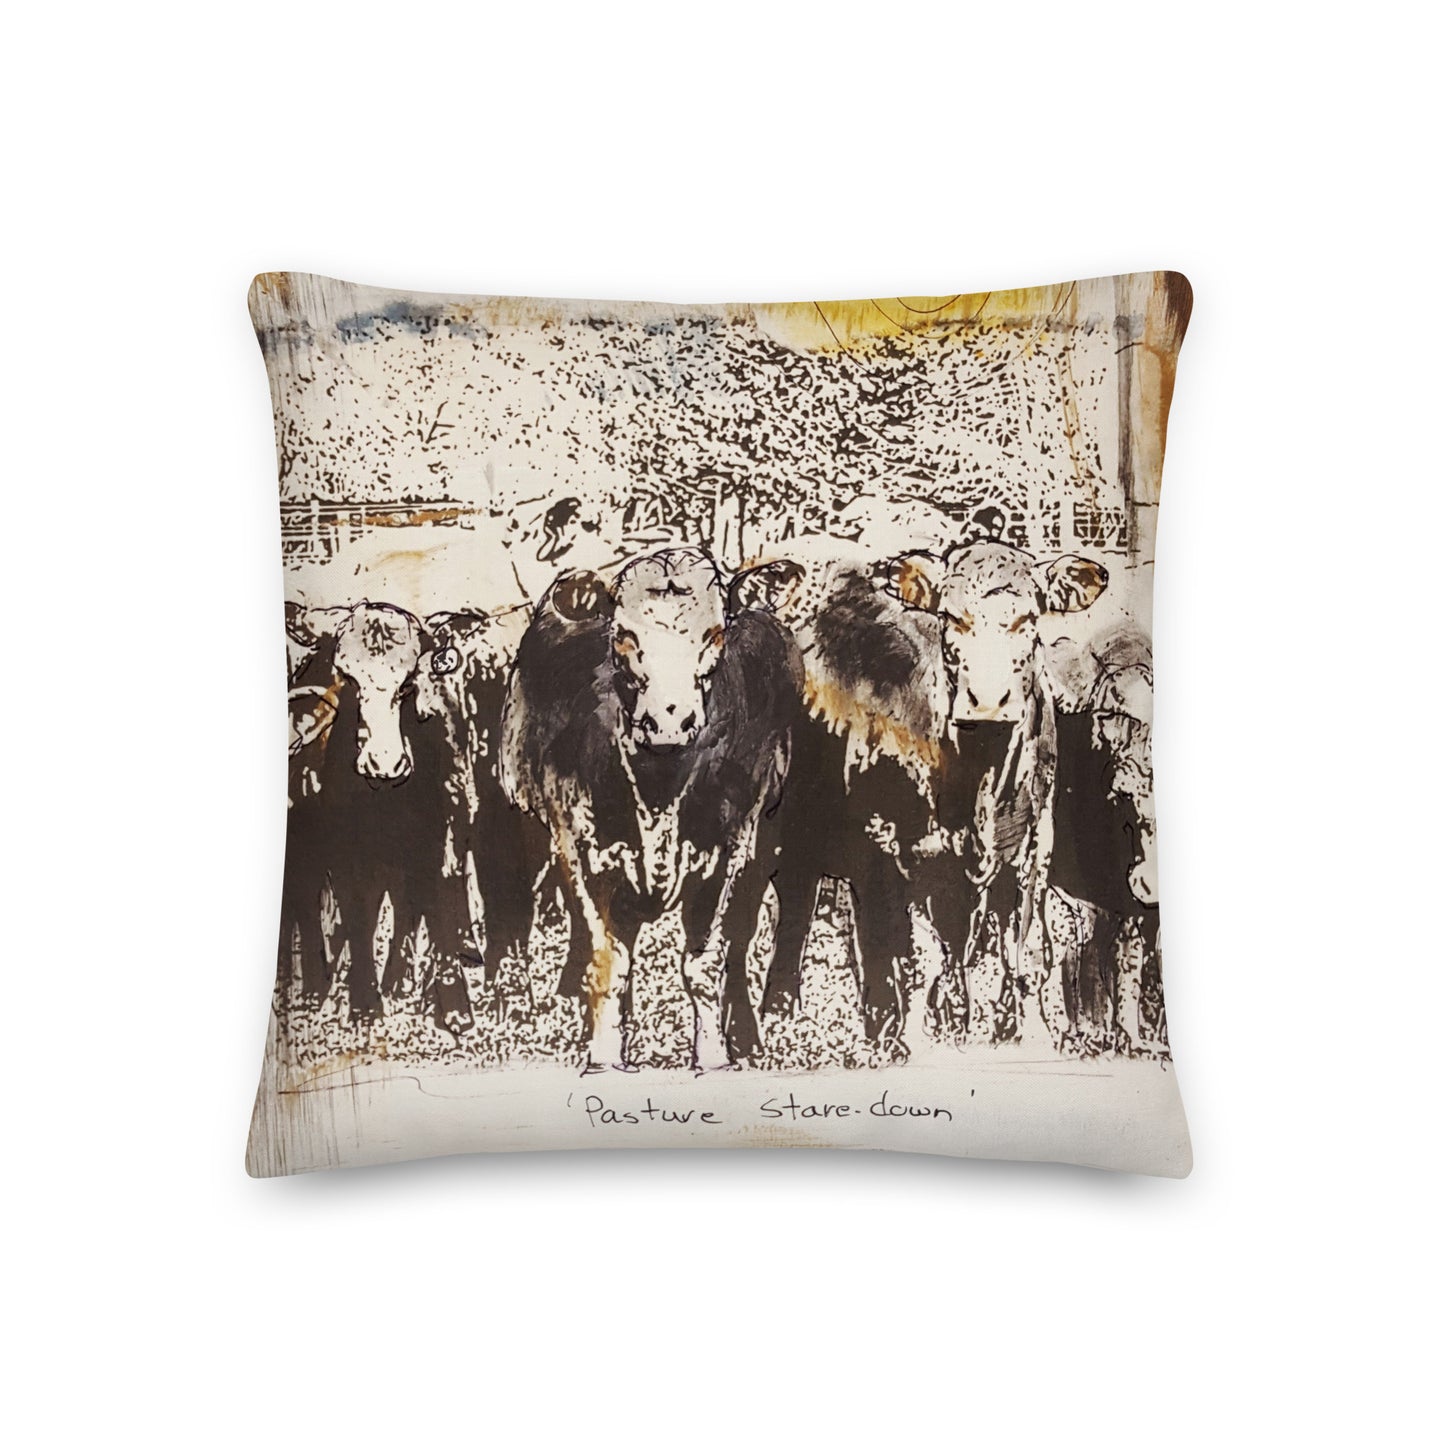 Throw pillow featuring cattle, cows, farm life and ranch life in a pasture.